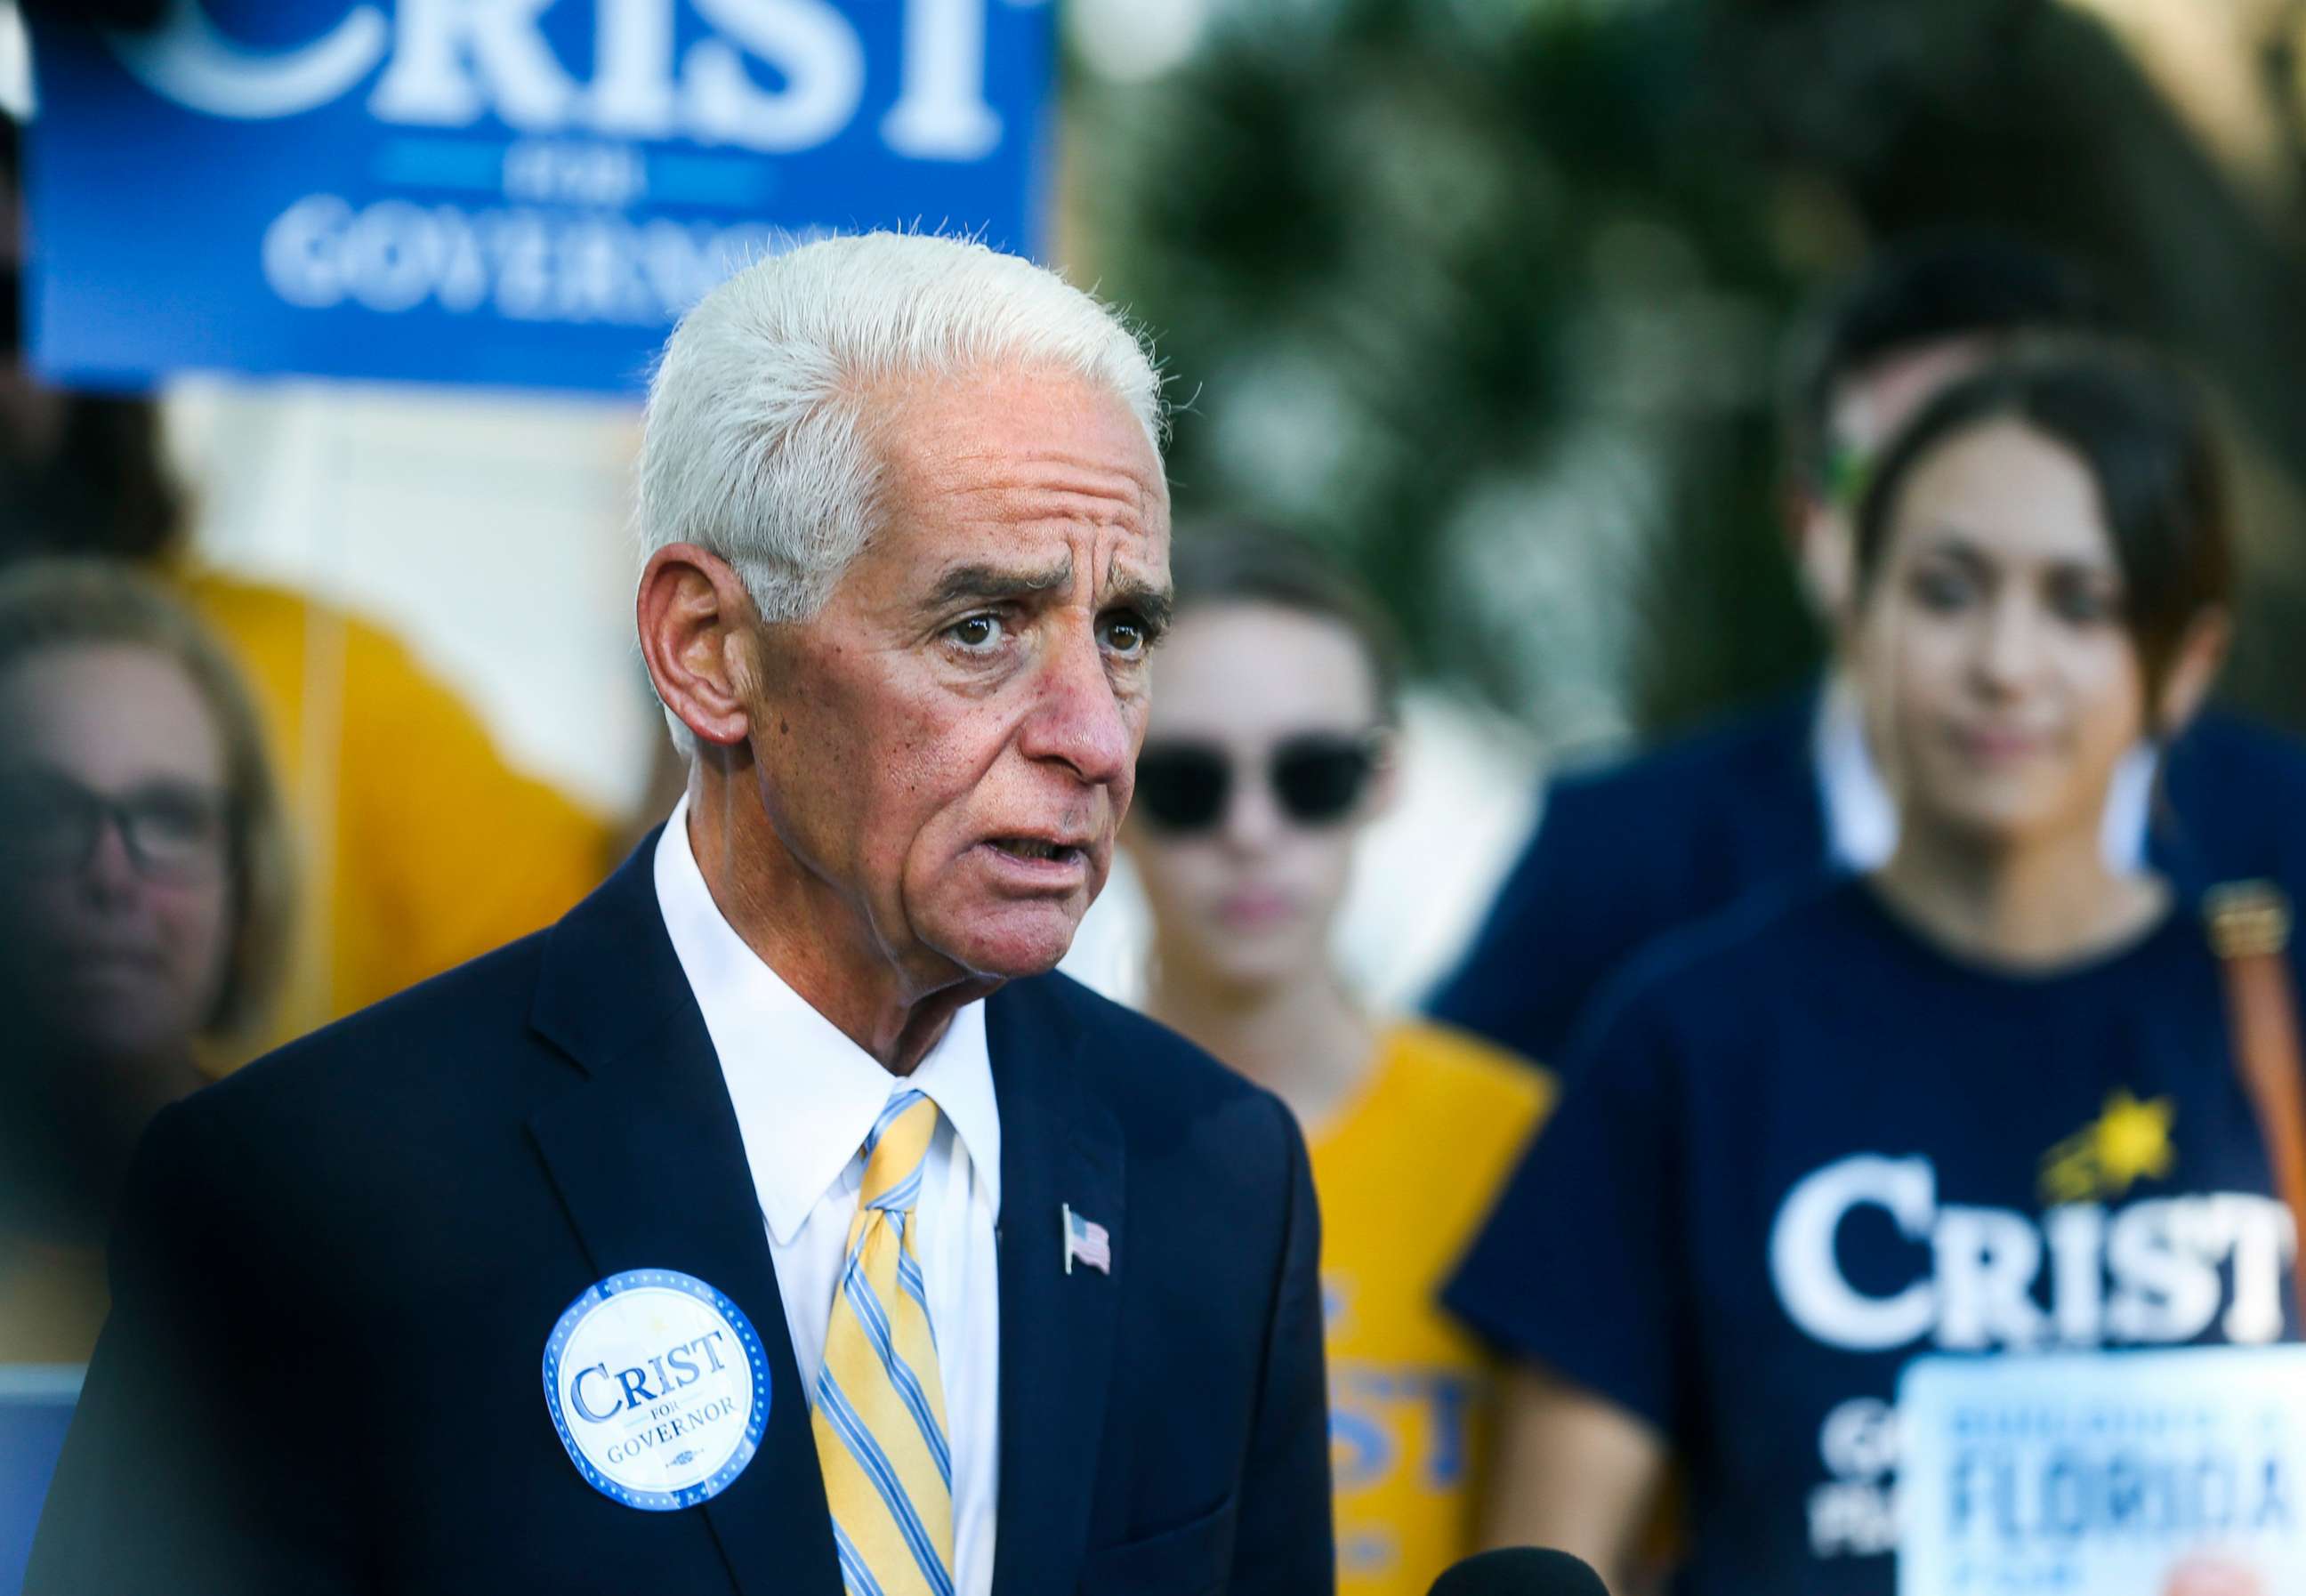 PHOTO: Rep. Charlie Crist addresses supporters and members of the media as he arrives to vote in person on Election Day at Gathering Church, Aug. 23, 2022, in St. Petersburg, Fla.